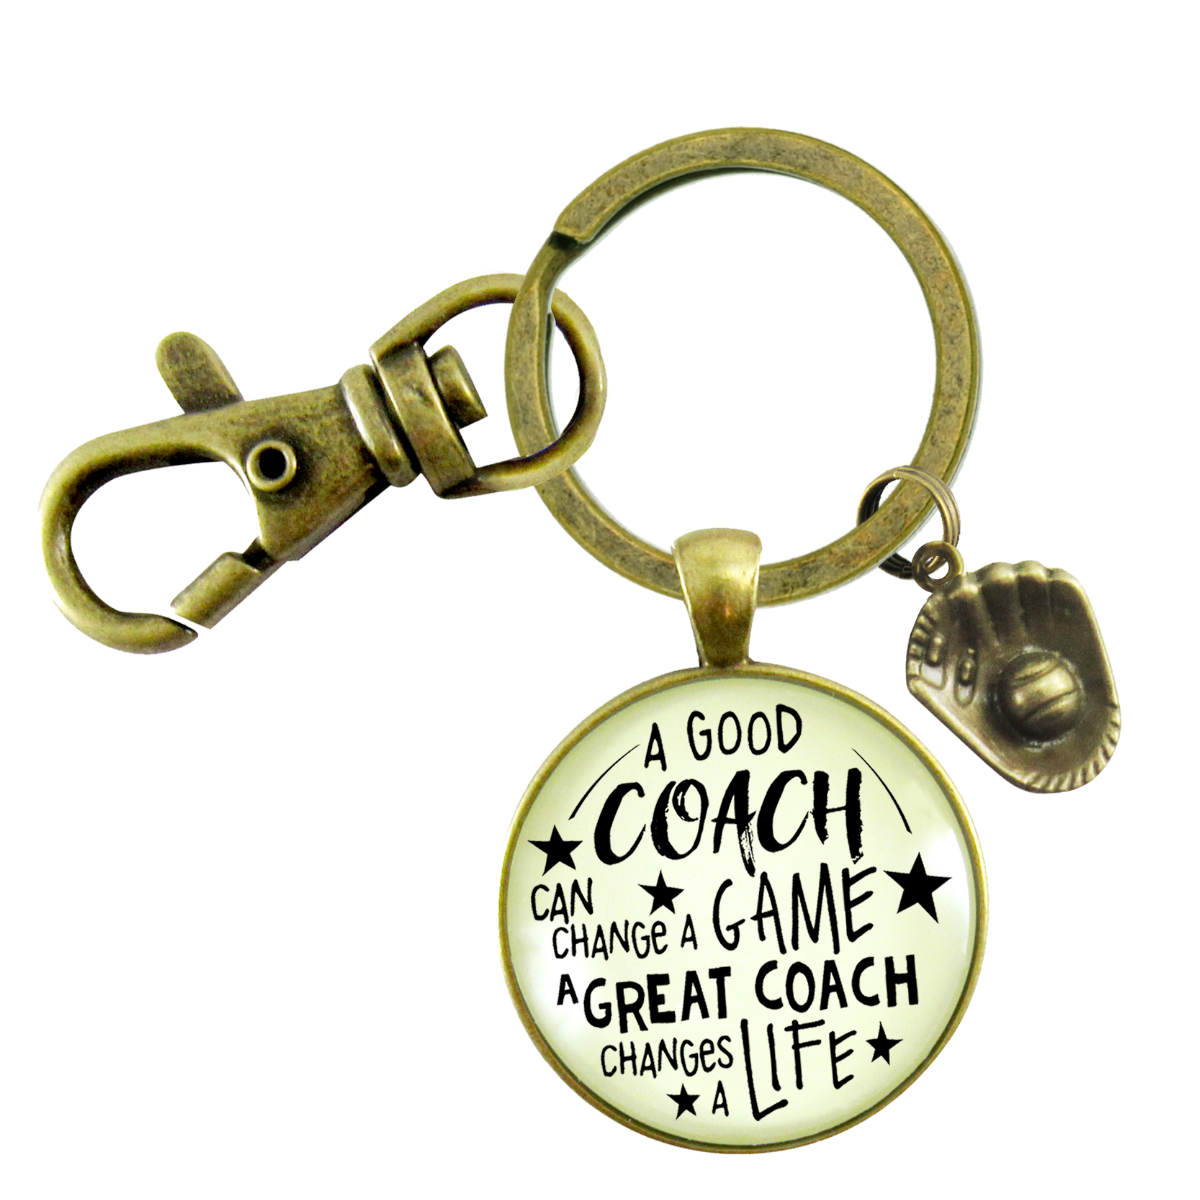 Softball Coaching Sport Keychain Great Coach Changes Life Thank You Gift - Gutsy Goodness Handmade Jewelry;Softball Coaching Sport Keychain Great Coach Changes Life Thank You Gift - Gutsy Goodness Handmade Jewelry Gifts